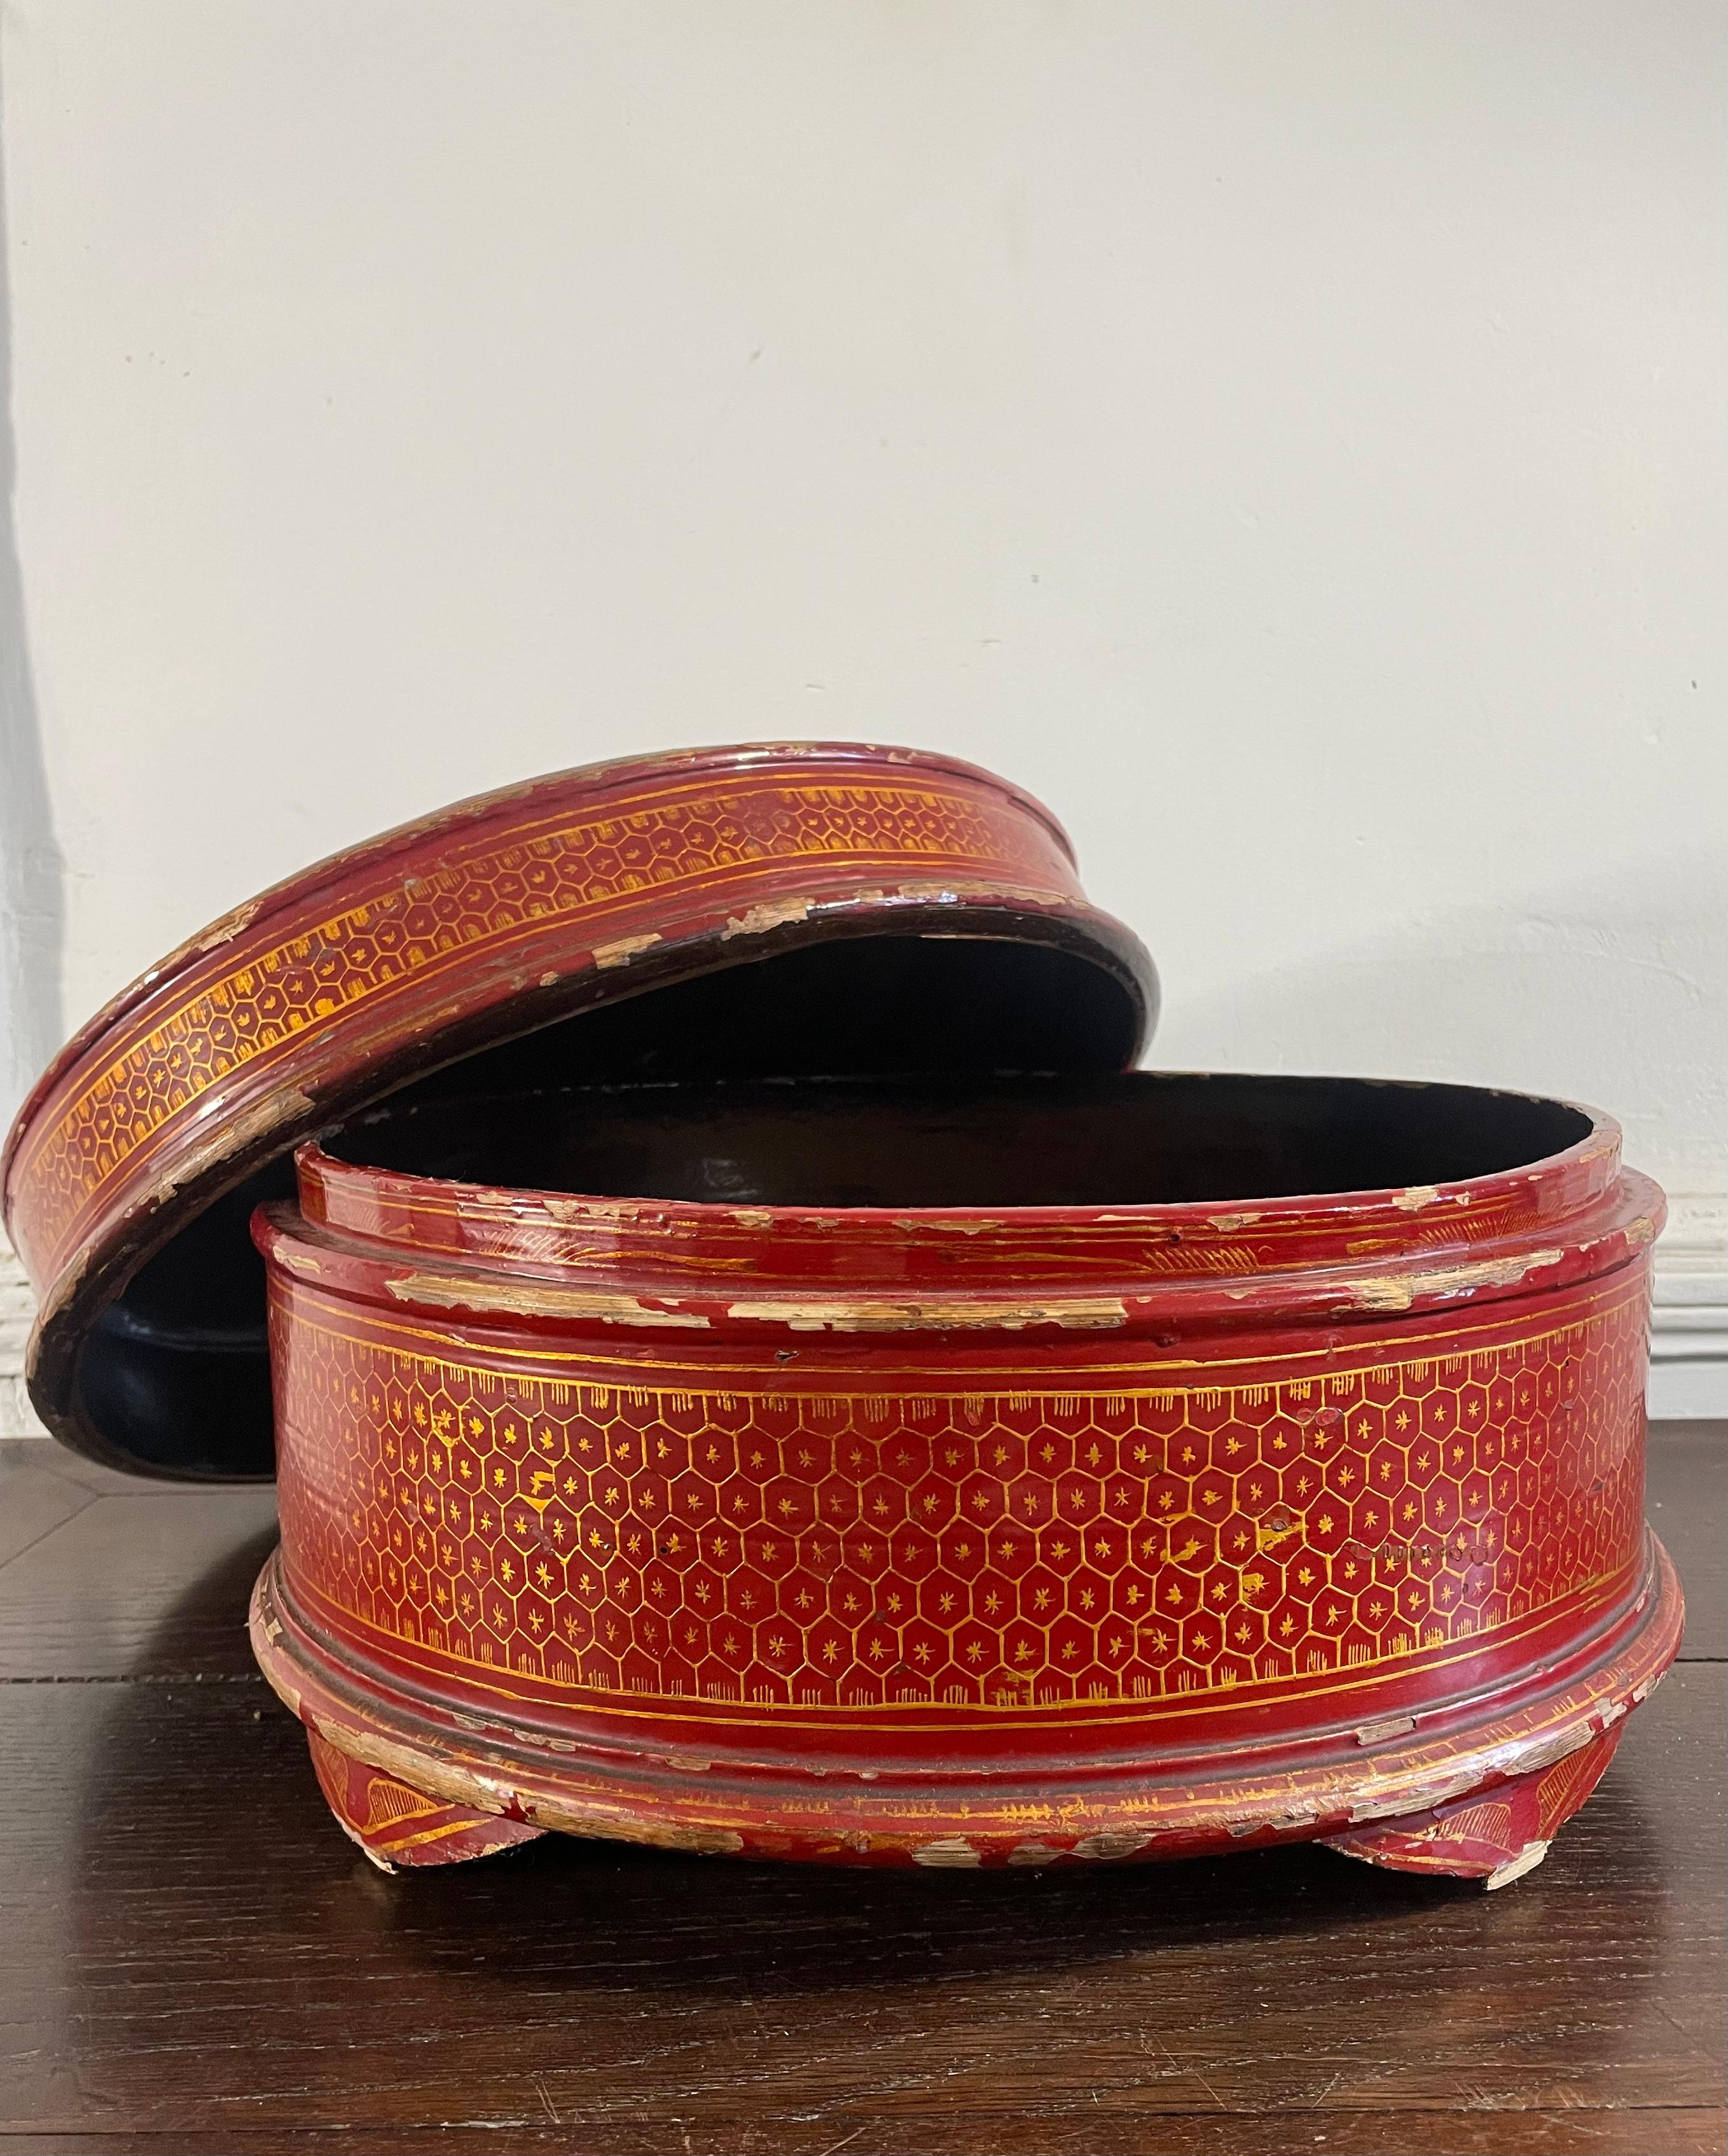 Bamboo Round red lacquered and gold leaf work box - China 19th Qing Dynasty For Sale